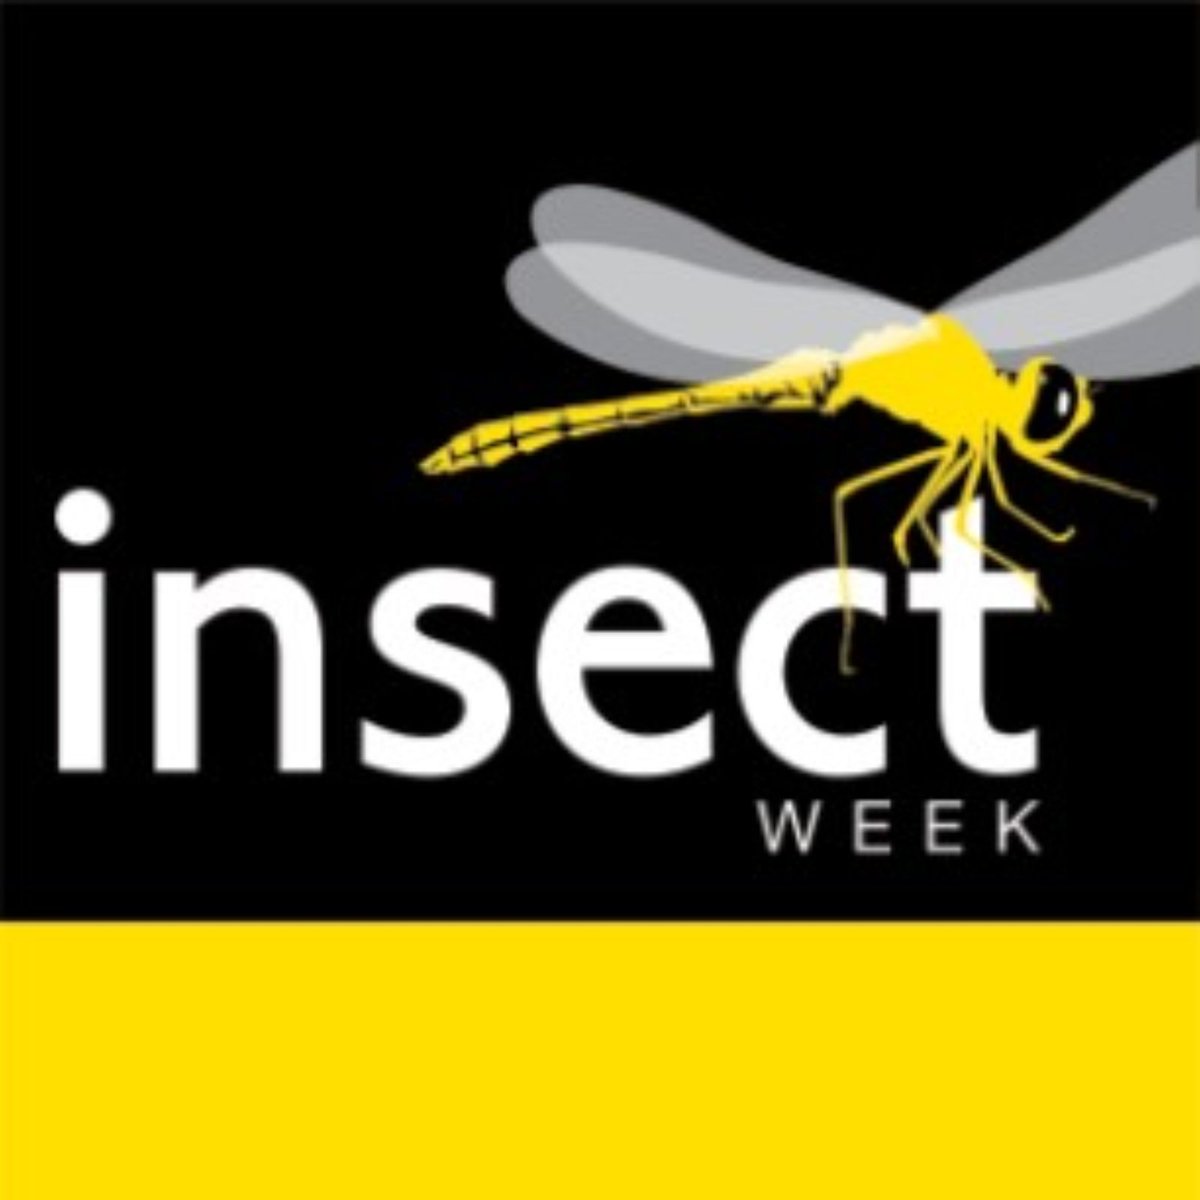 Insect week is coming! (19th- 25th June).

Insects are the little things that run the world! Find out more here - insectweek.org

#InsectWeek2023 @RoylEntSoc @insectweek